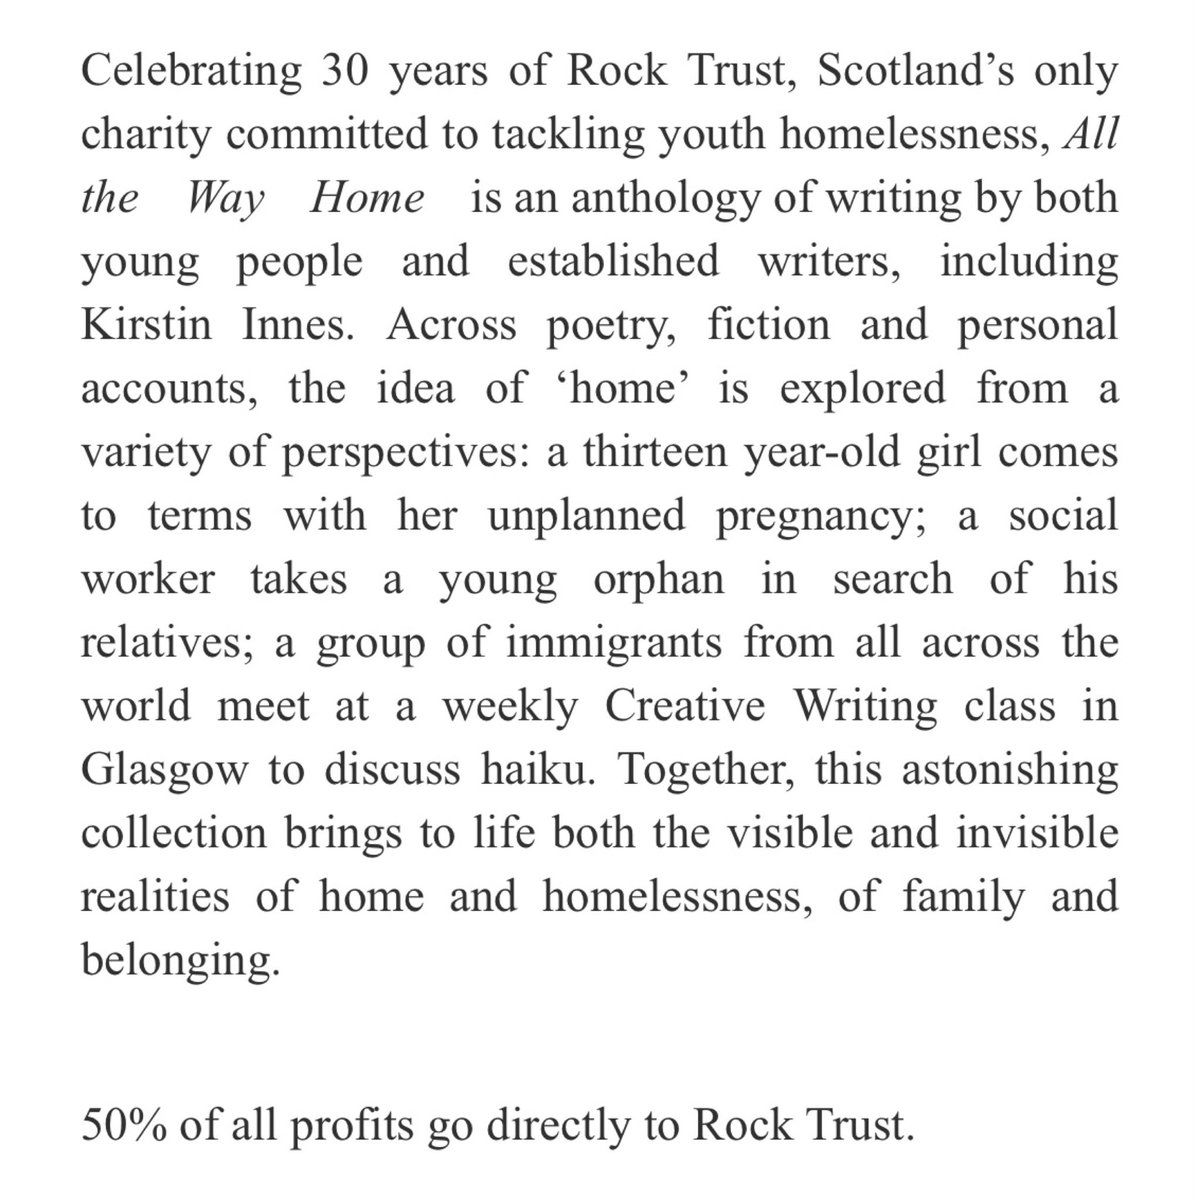 All The Way Home - An Anthology @RockTrust_tweet
@PressTaproot 
@lovebookstours 
#youthhomelessness #scotland #fiction #anthology #socialjustice #homelessness #poetry #publishing #scottishpublisher My review instagram.com/p/Cefrqb_AMgO/ ⭐️⭐️⭐️⭐️⭐️